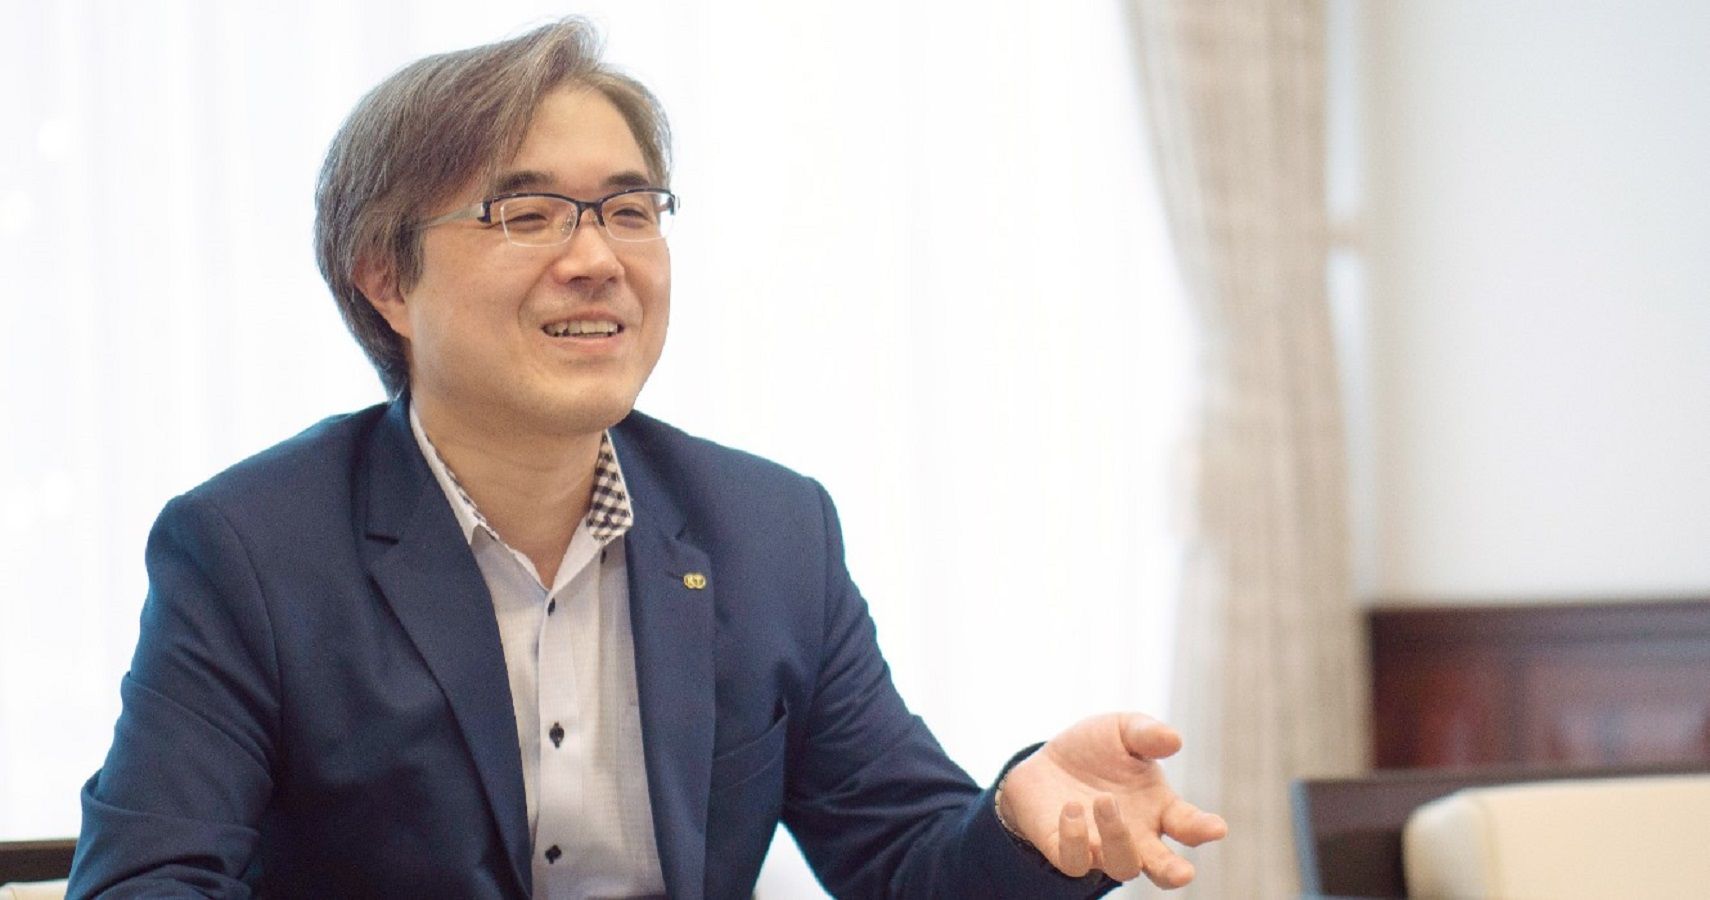 Samurai Warriors 5 Interview With Koei Tecmo Games President Hisashi Koinuma On Spin-Offs, Omega Force, PS5, And More